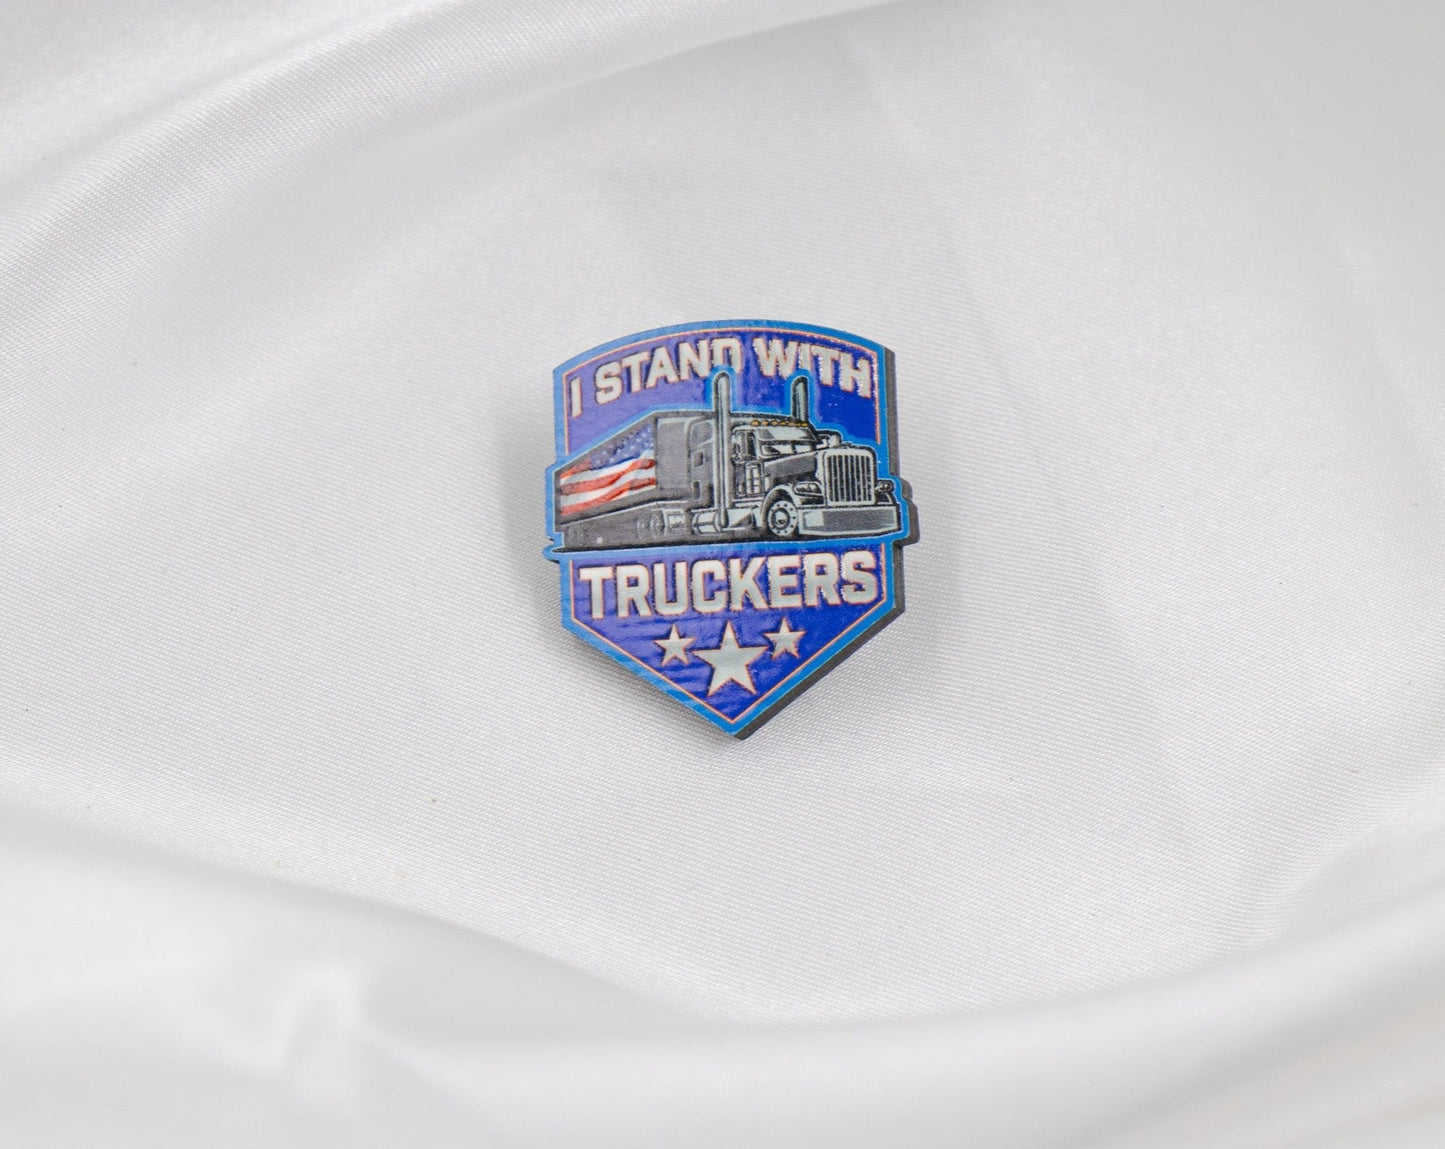 I Stand With Truckers Pin